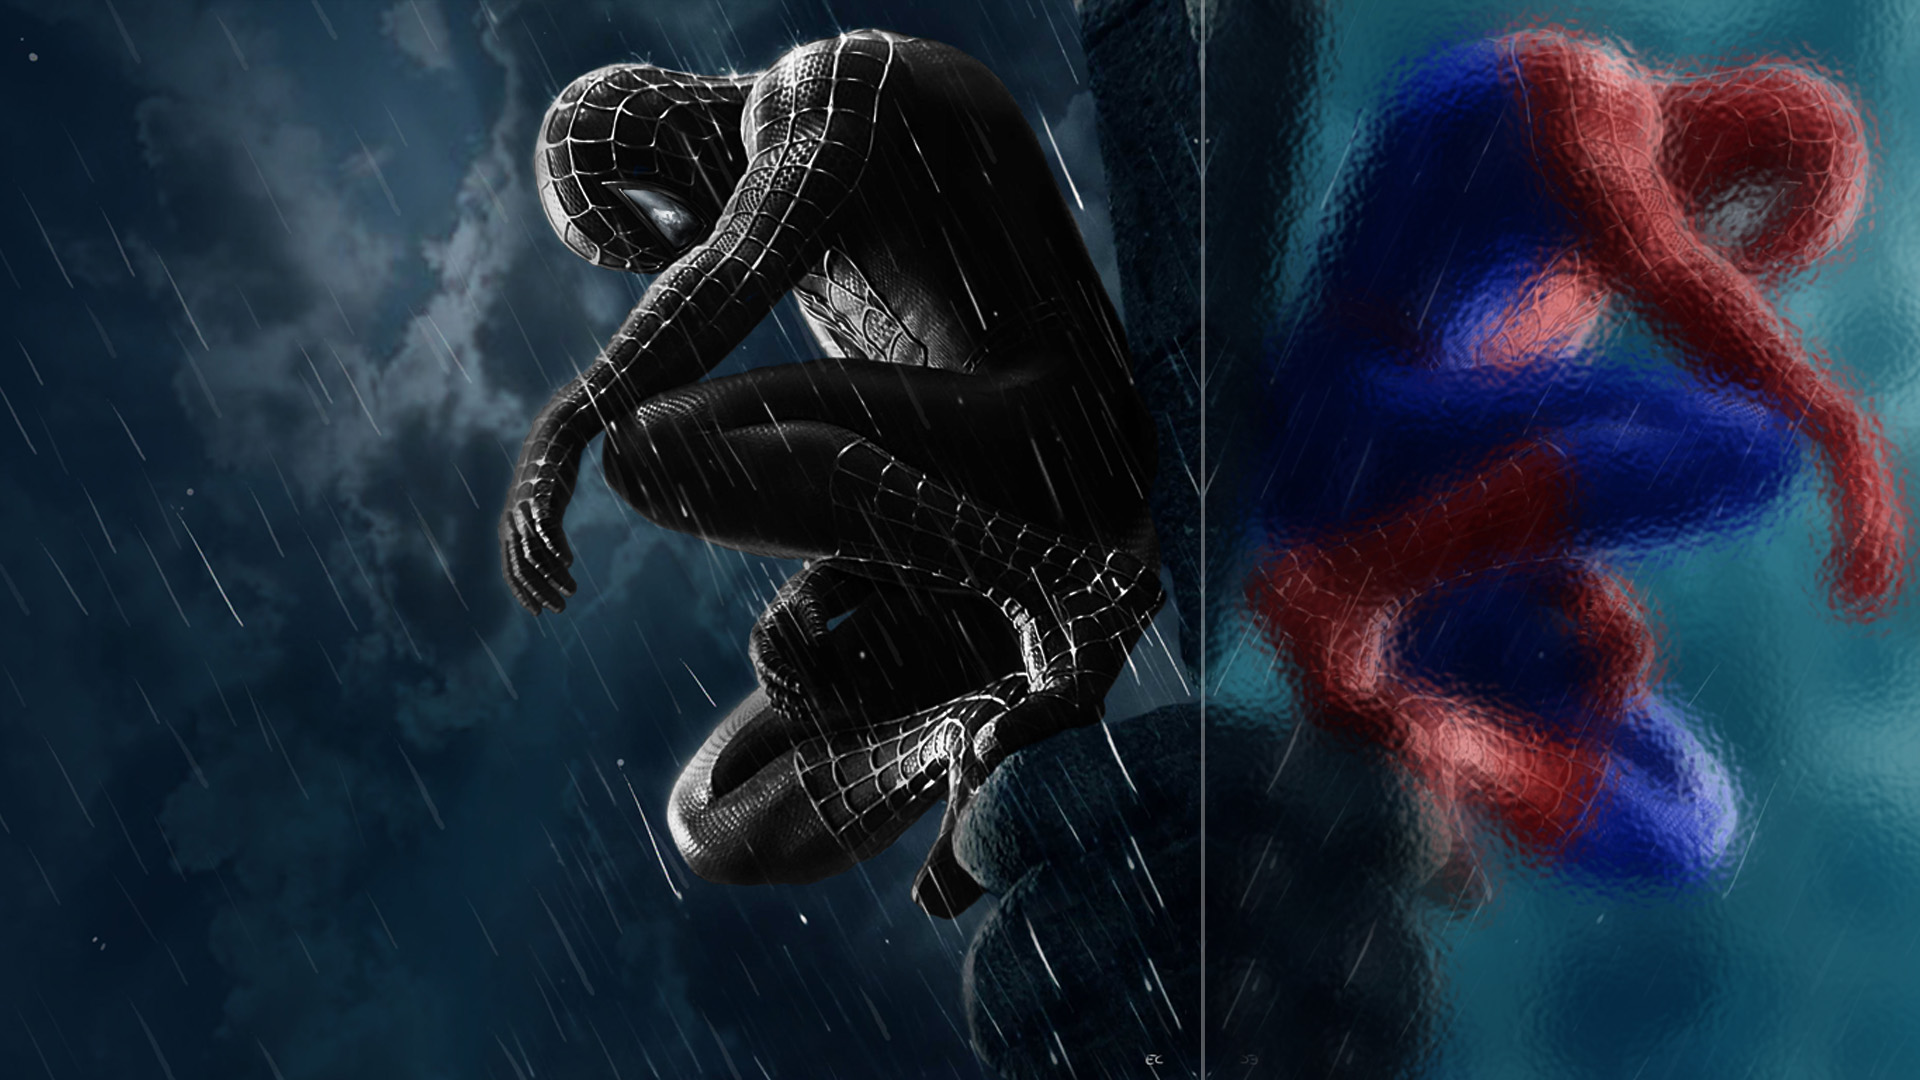 Spiderman 3 Wallpaper Reflections 1920x1080 by Omegacronalpha on 1920x1080